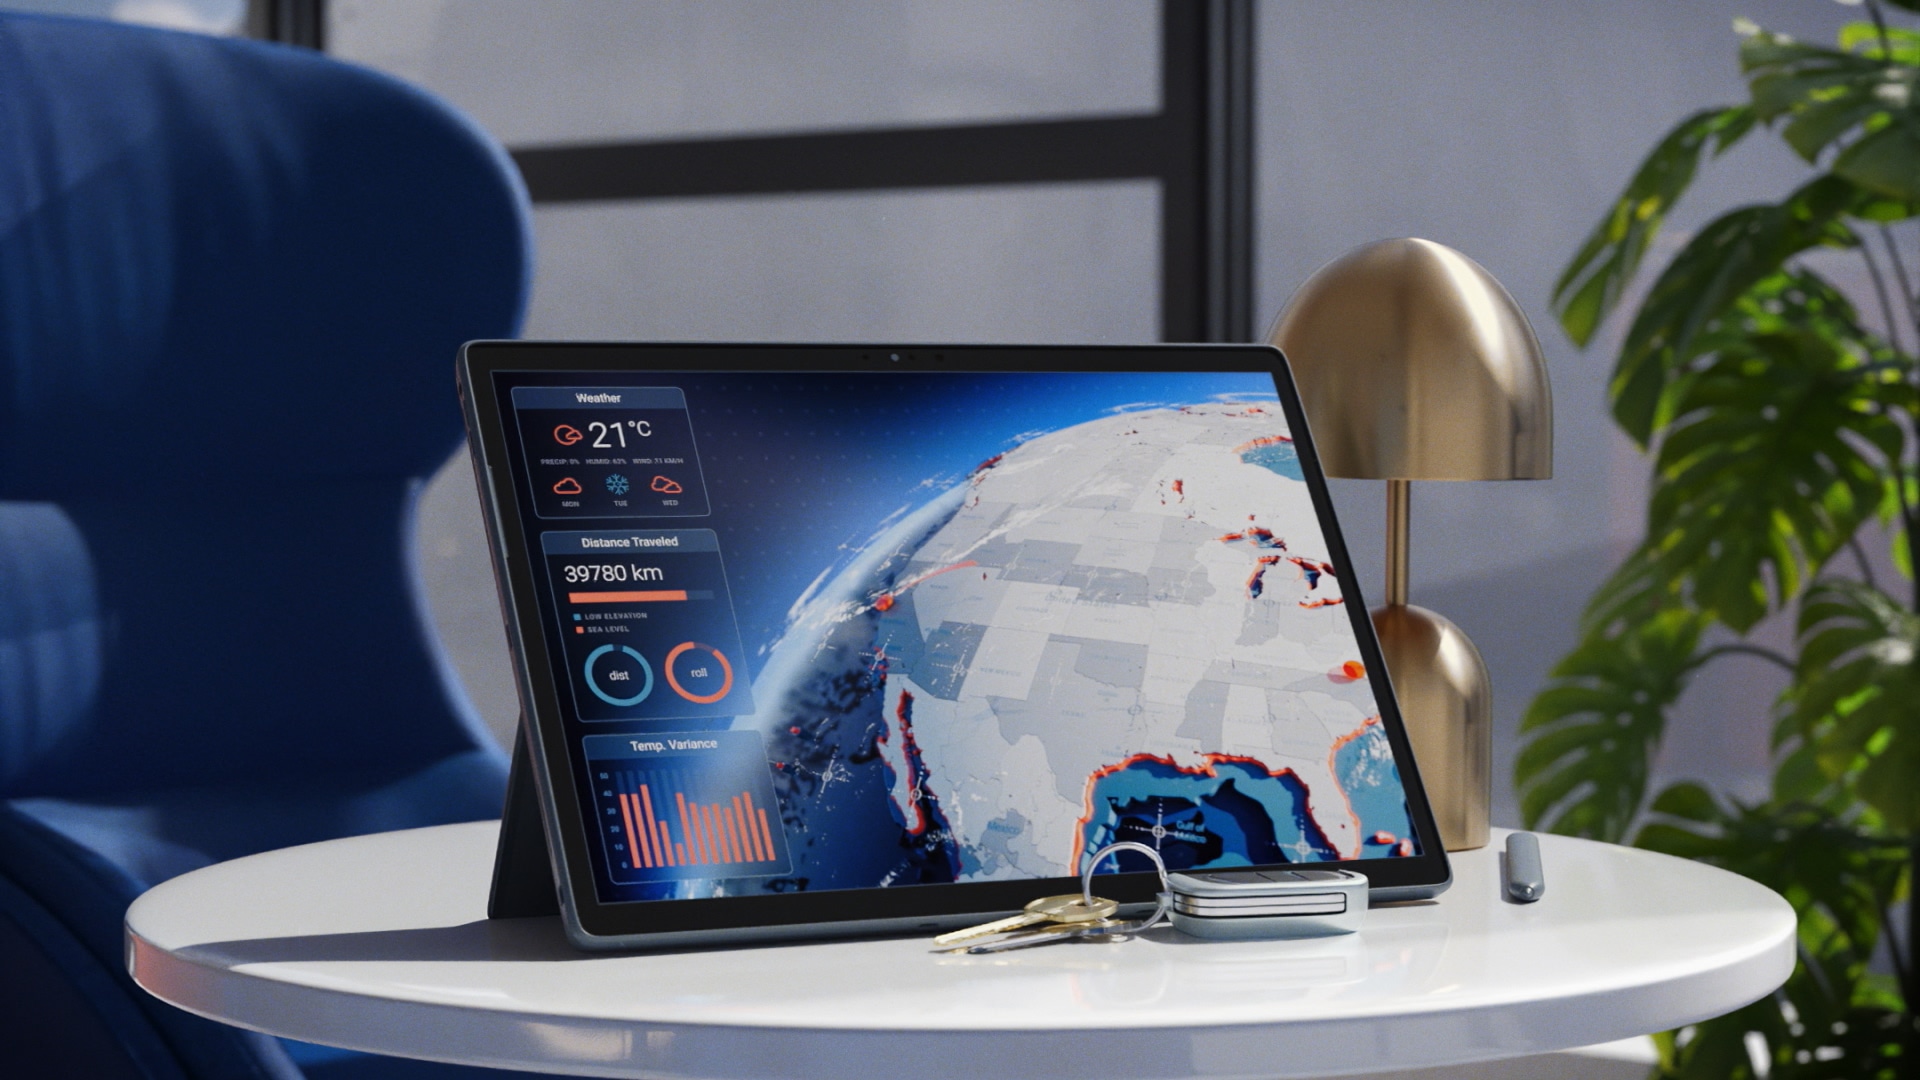 Dell Latitude 7350 Detachable — Versatility any way you look at it.